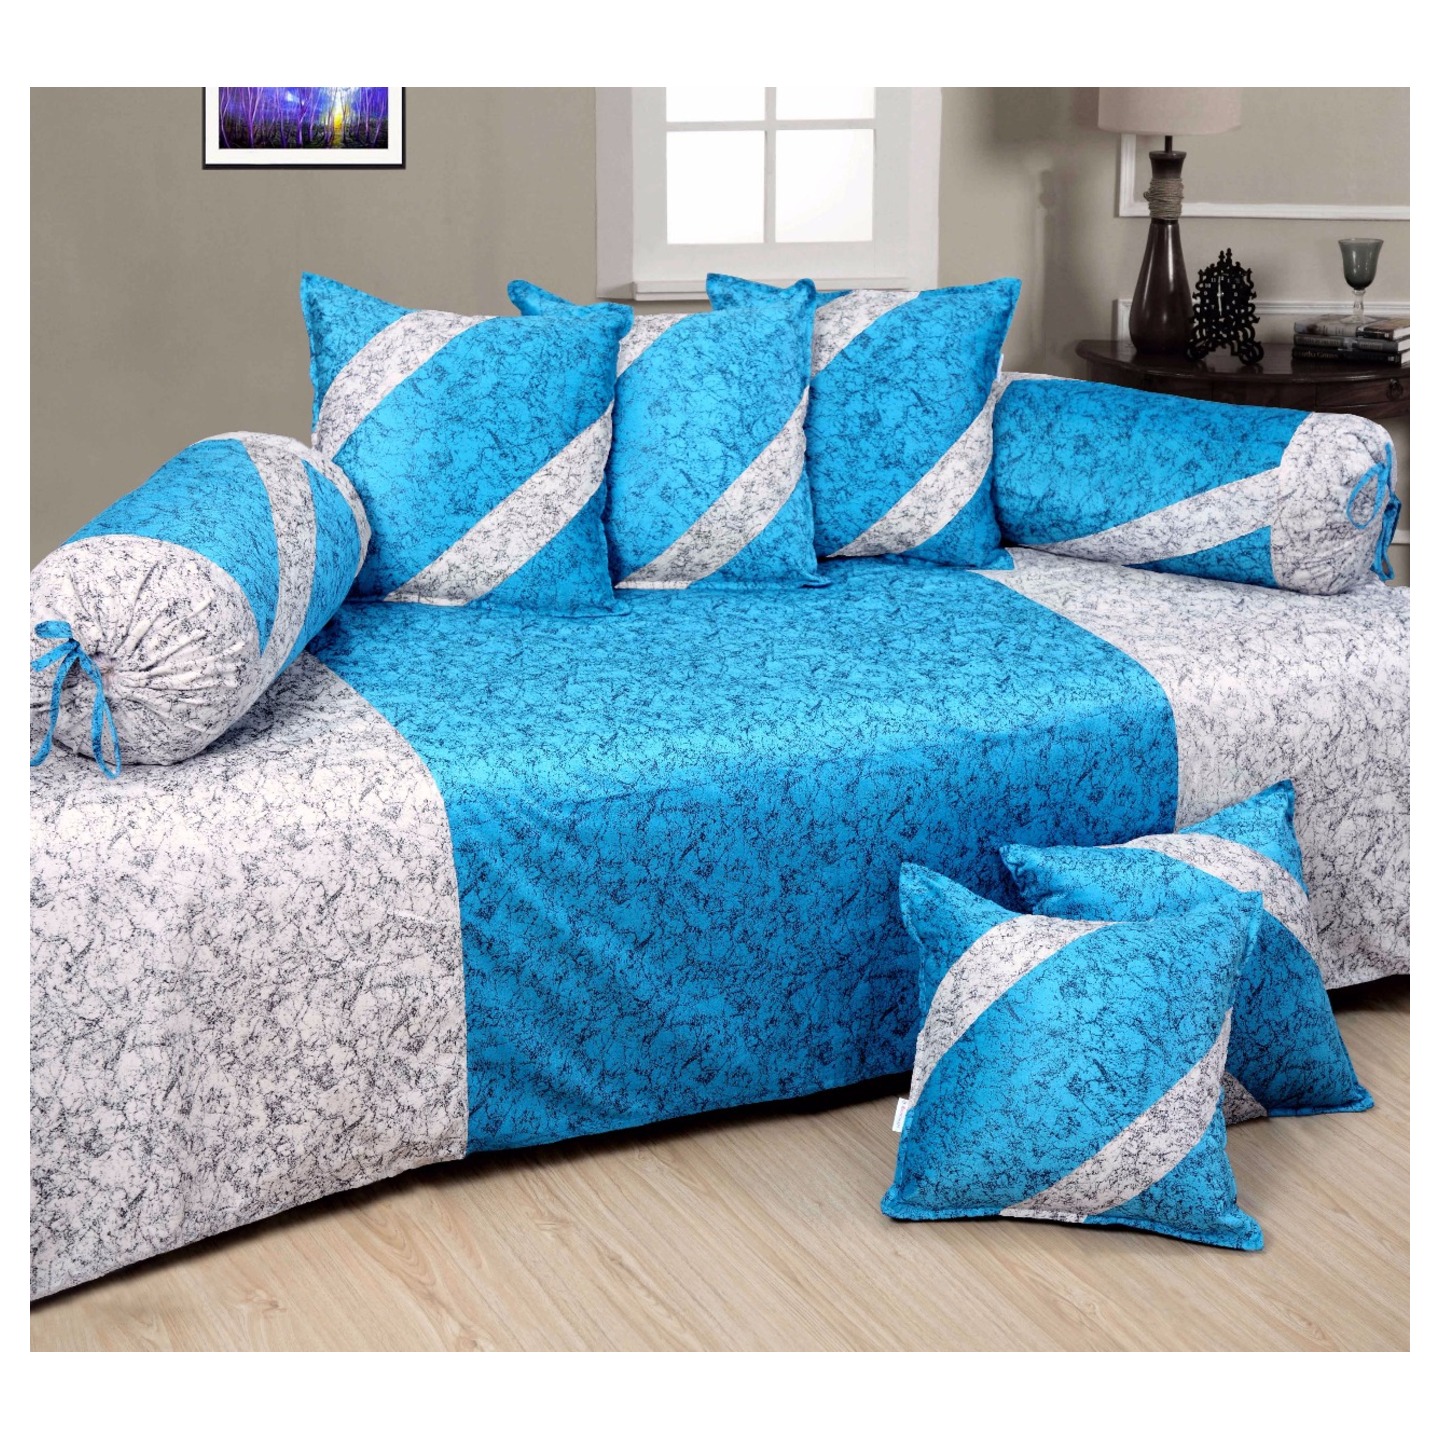 HandTex Home Presents Velvet  blue Color Diwan Set with 1 Single Bedsheet with 5 Cushion Covers & 2 Blosters Set of 8 pcs